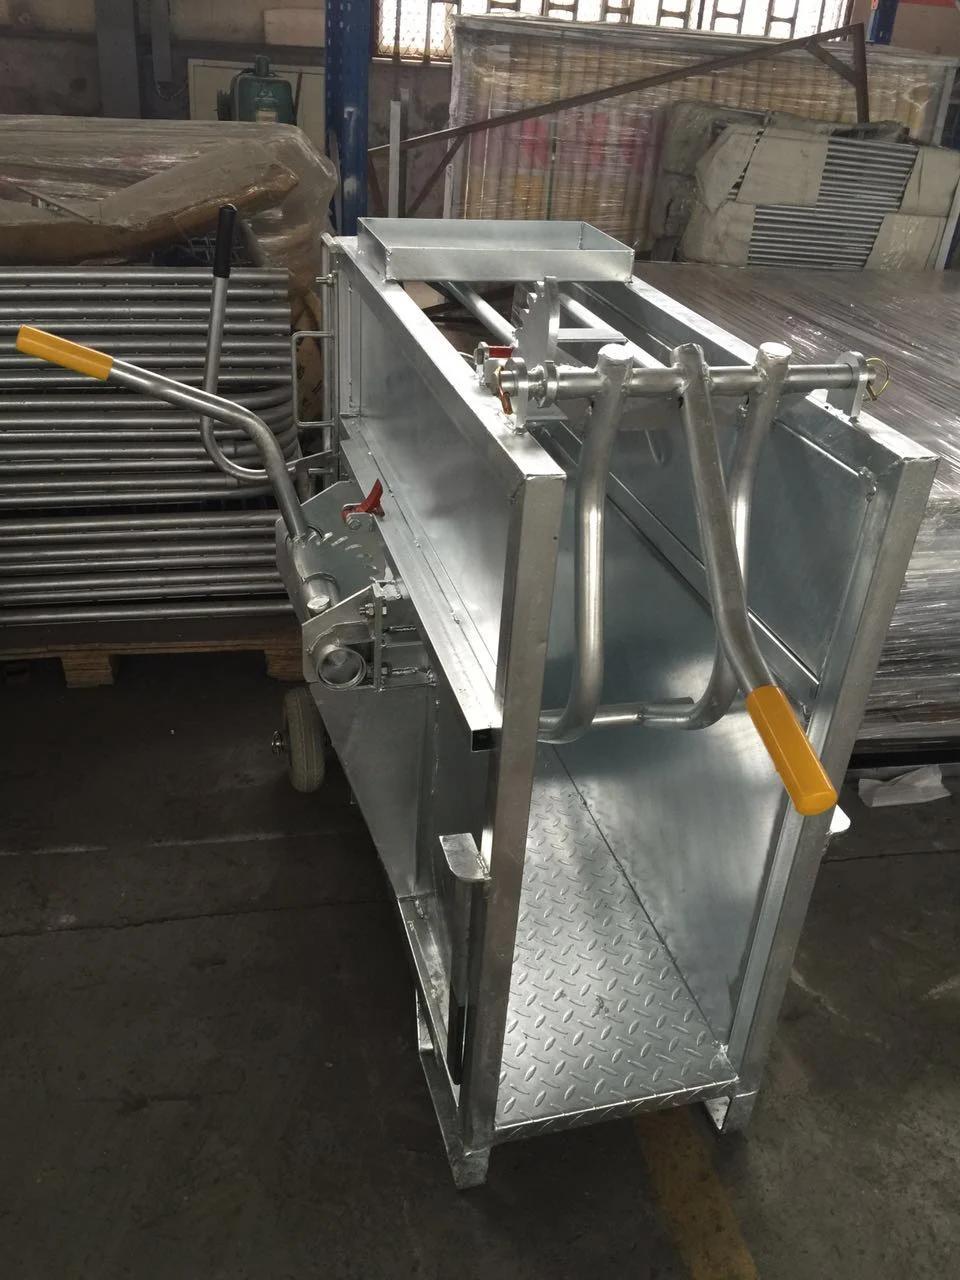 Hot Dipped Galvanised Calf Box Crate for Sale